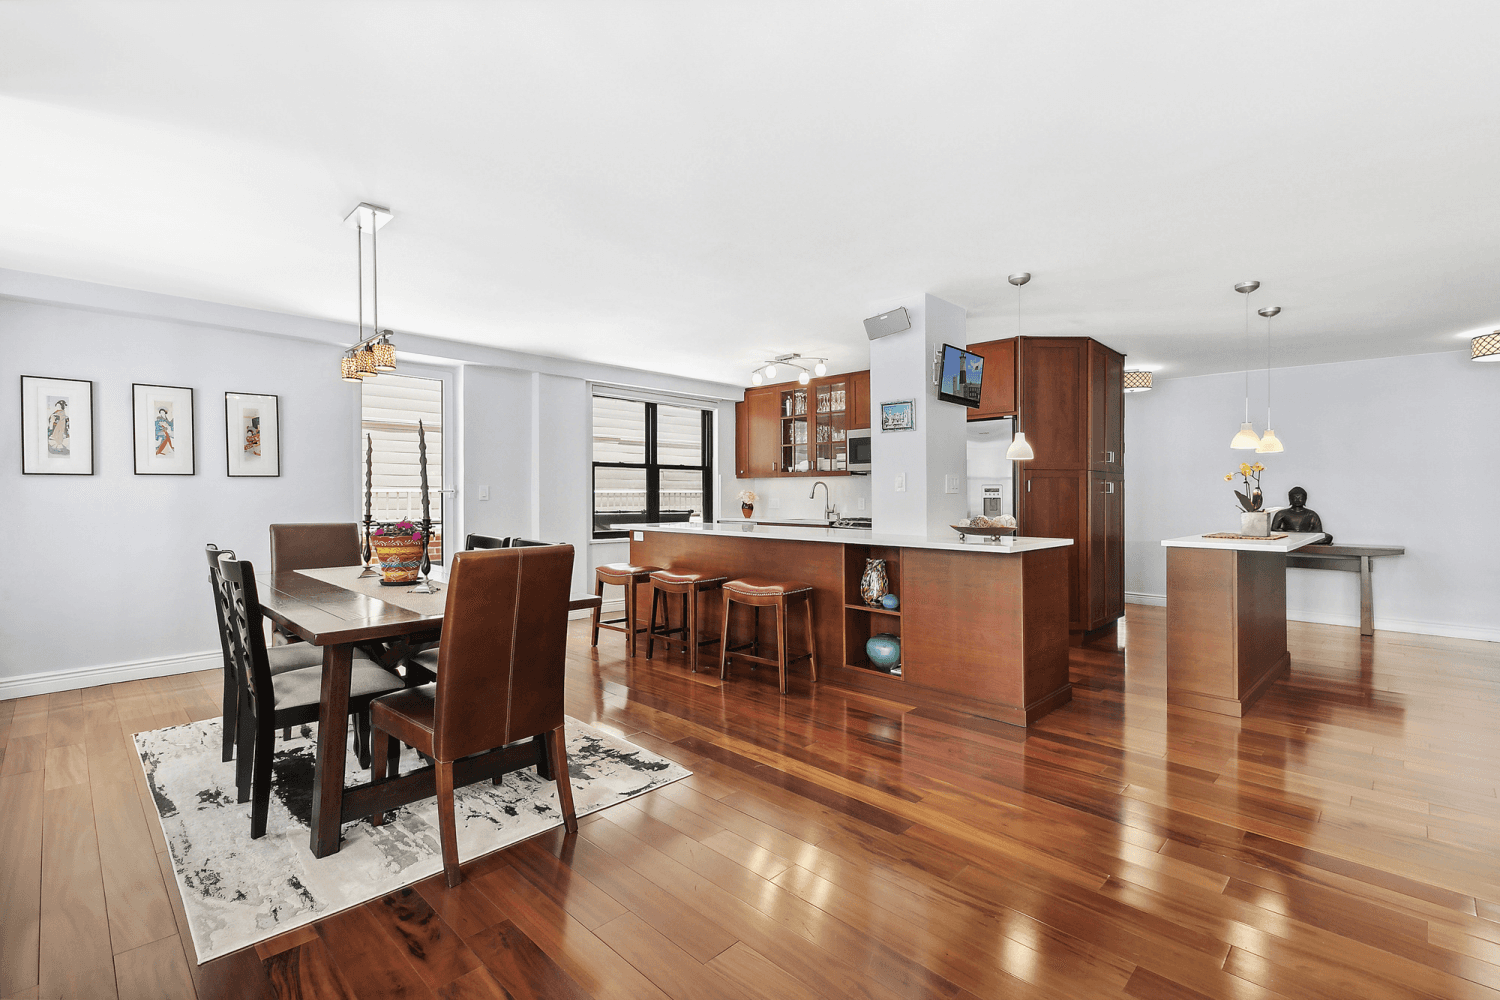 Perched high above Murray Hill, enjoying blue skies and open city views, is a 3 bedroom, 3 bath cooperative apartment in excellent, move in condition.